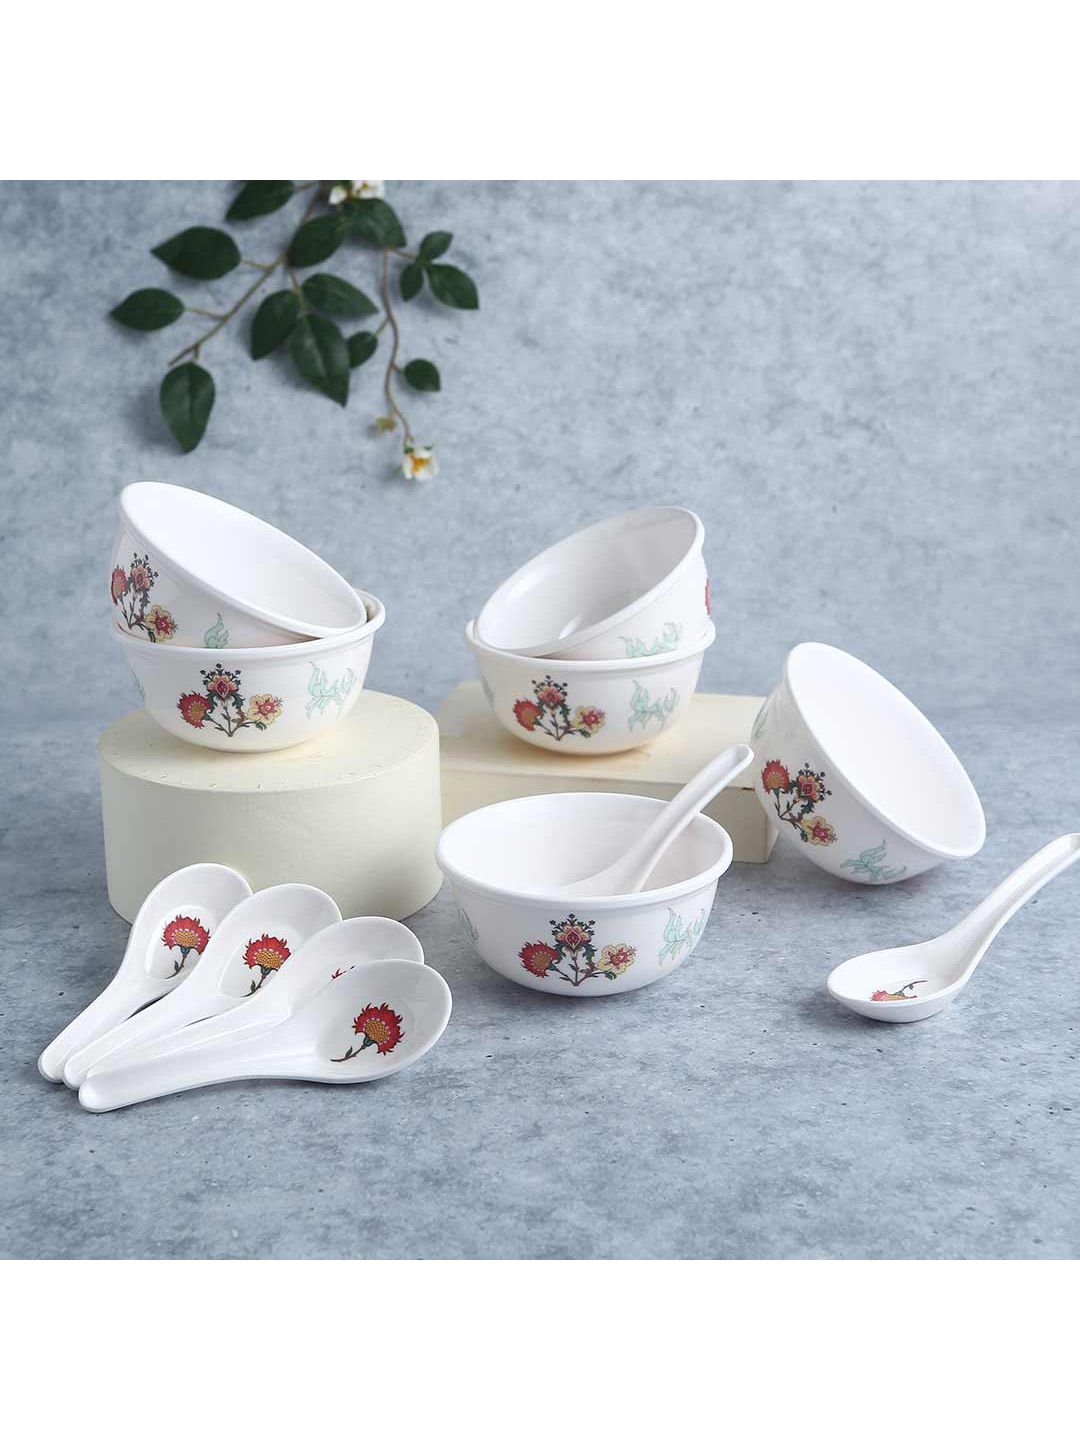 Wonderchef 6 Pcs White & Red Venice Printed Melamine Soup Bowls with Spoon Price in India